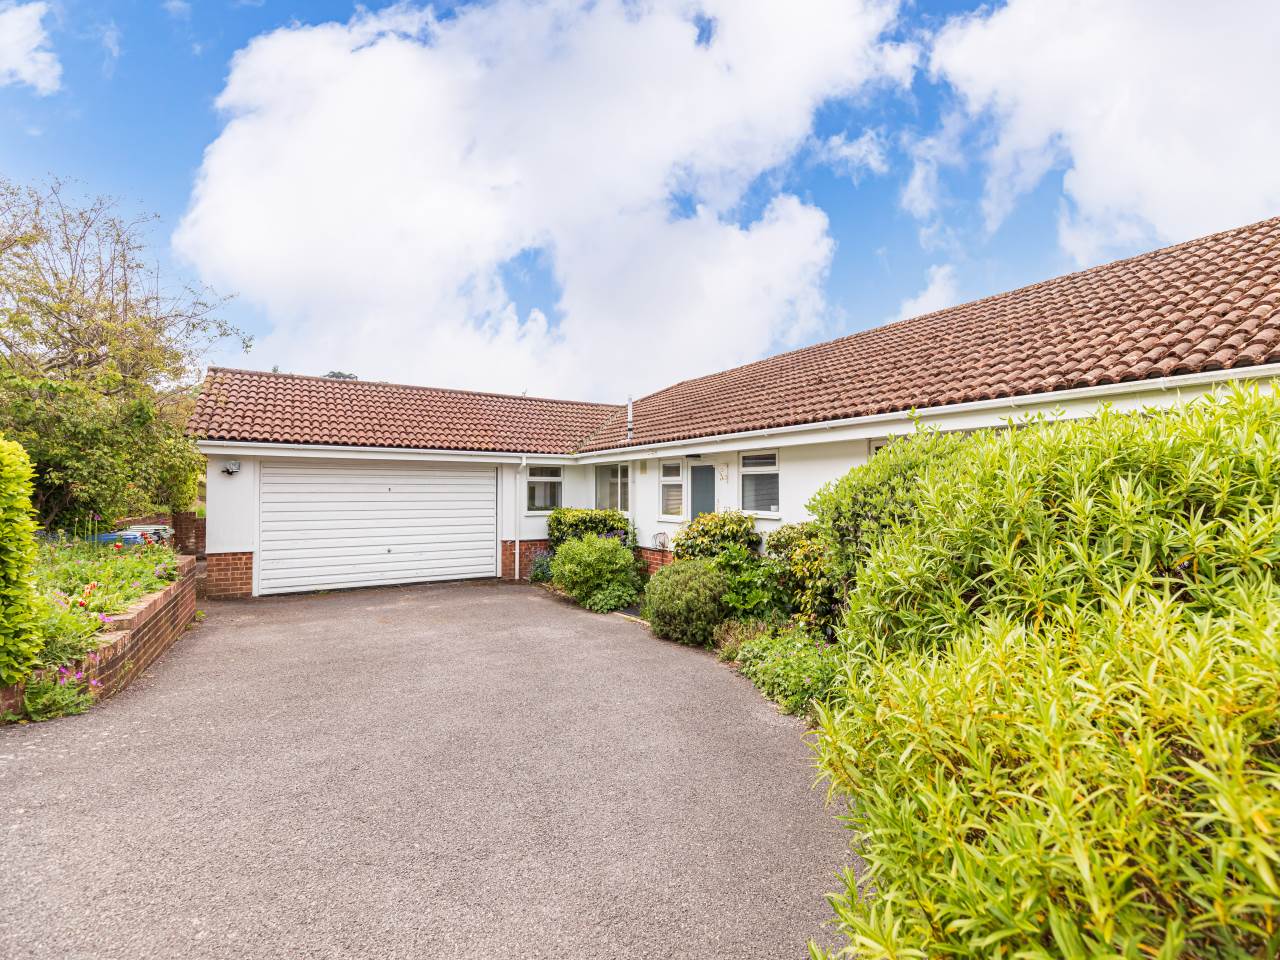 * DETACHED BUNGALOW * IN EXCESS OF 2000 SQ FT * EXCLUSIVE AREA * THREE DOUBLE BEDROOMS * LARGE LOUNGE/DINER * STUDY * LARGE EN SUITE/WET ROOM WITH WALK IN WARDROBE * CONSERVATORY * SOUTH FACING GARDEN * DOUBLE GARAGE * KITCHEN & UTILITY ROOM * NO CHAIN * VACANT POSESSION *